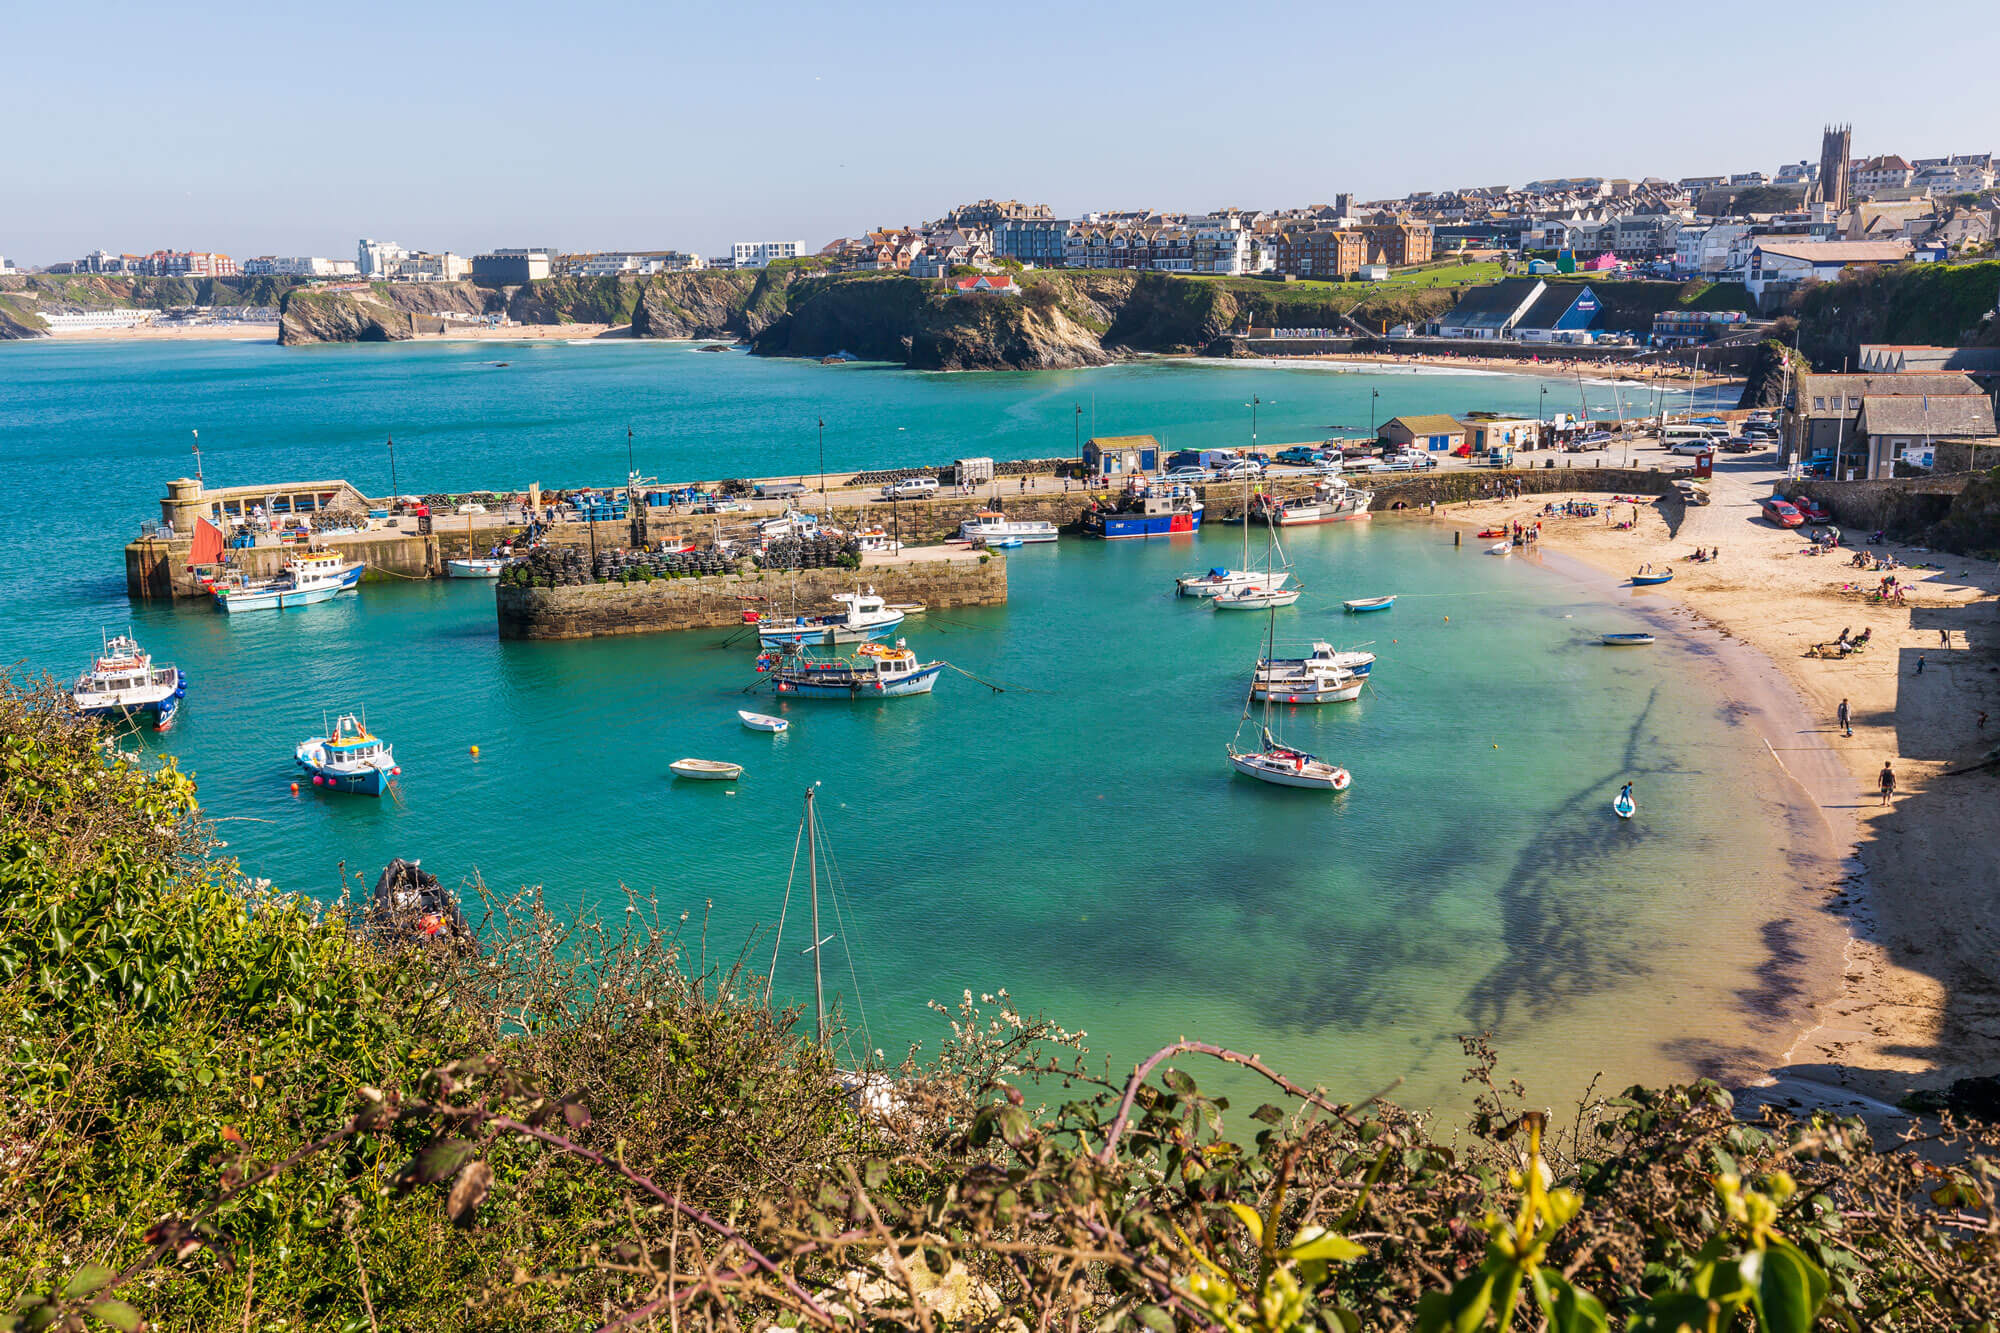 Newquay Harbour with a panoramic view of Newquay town